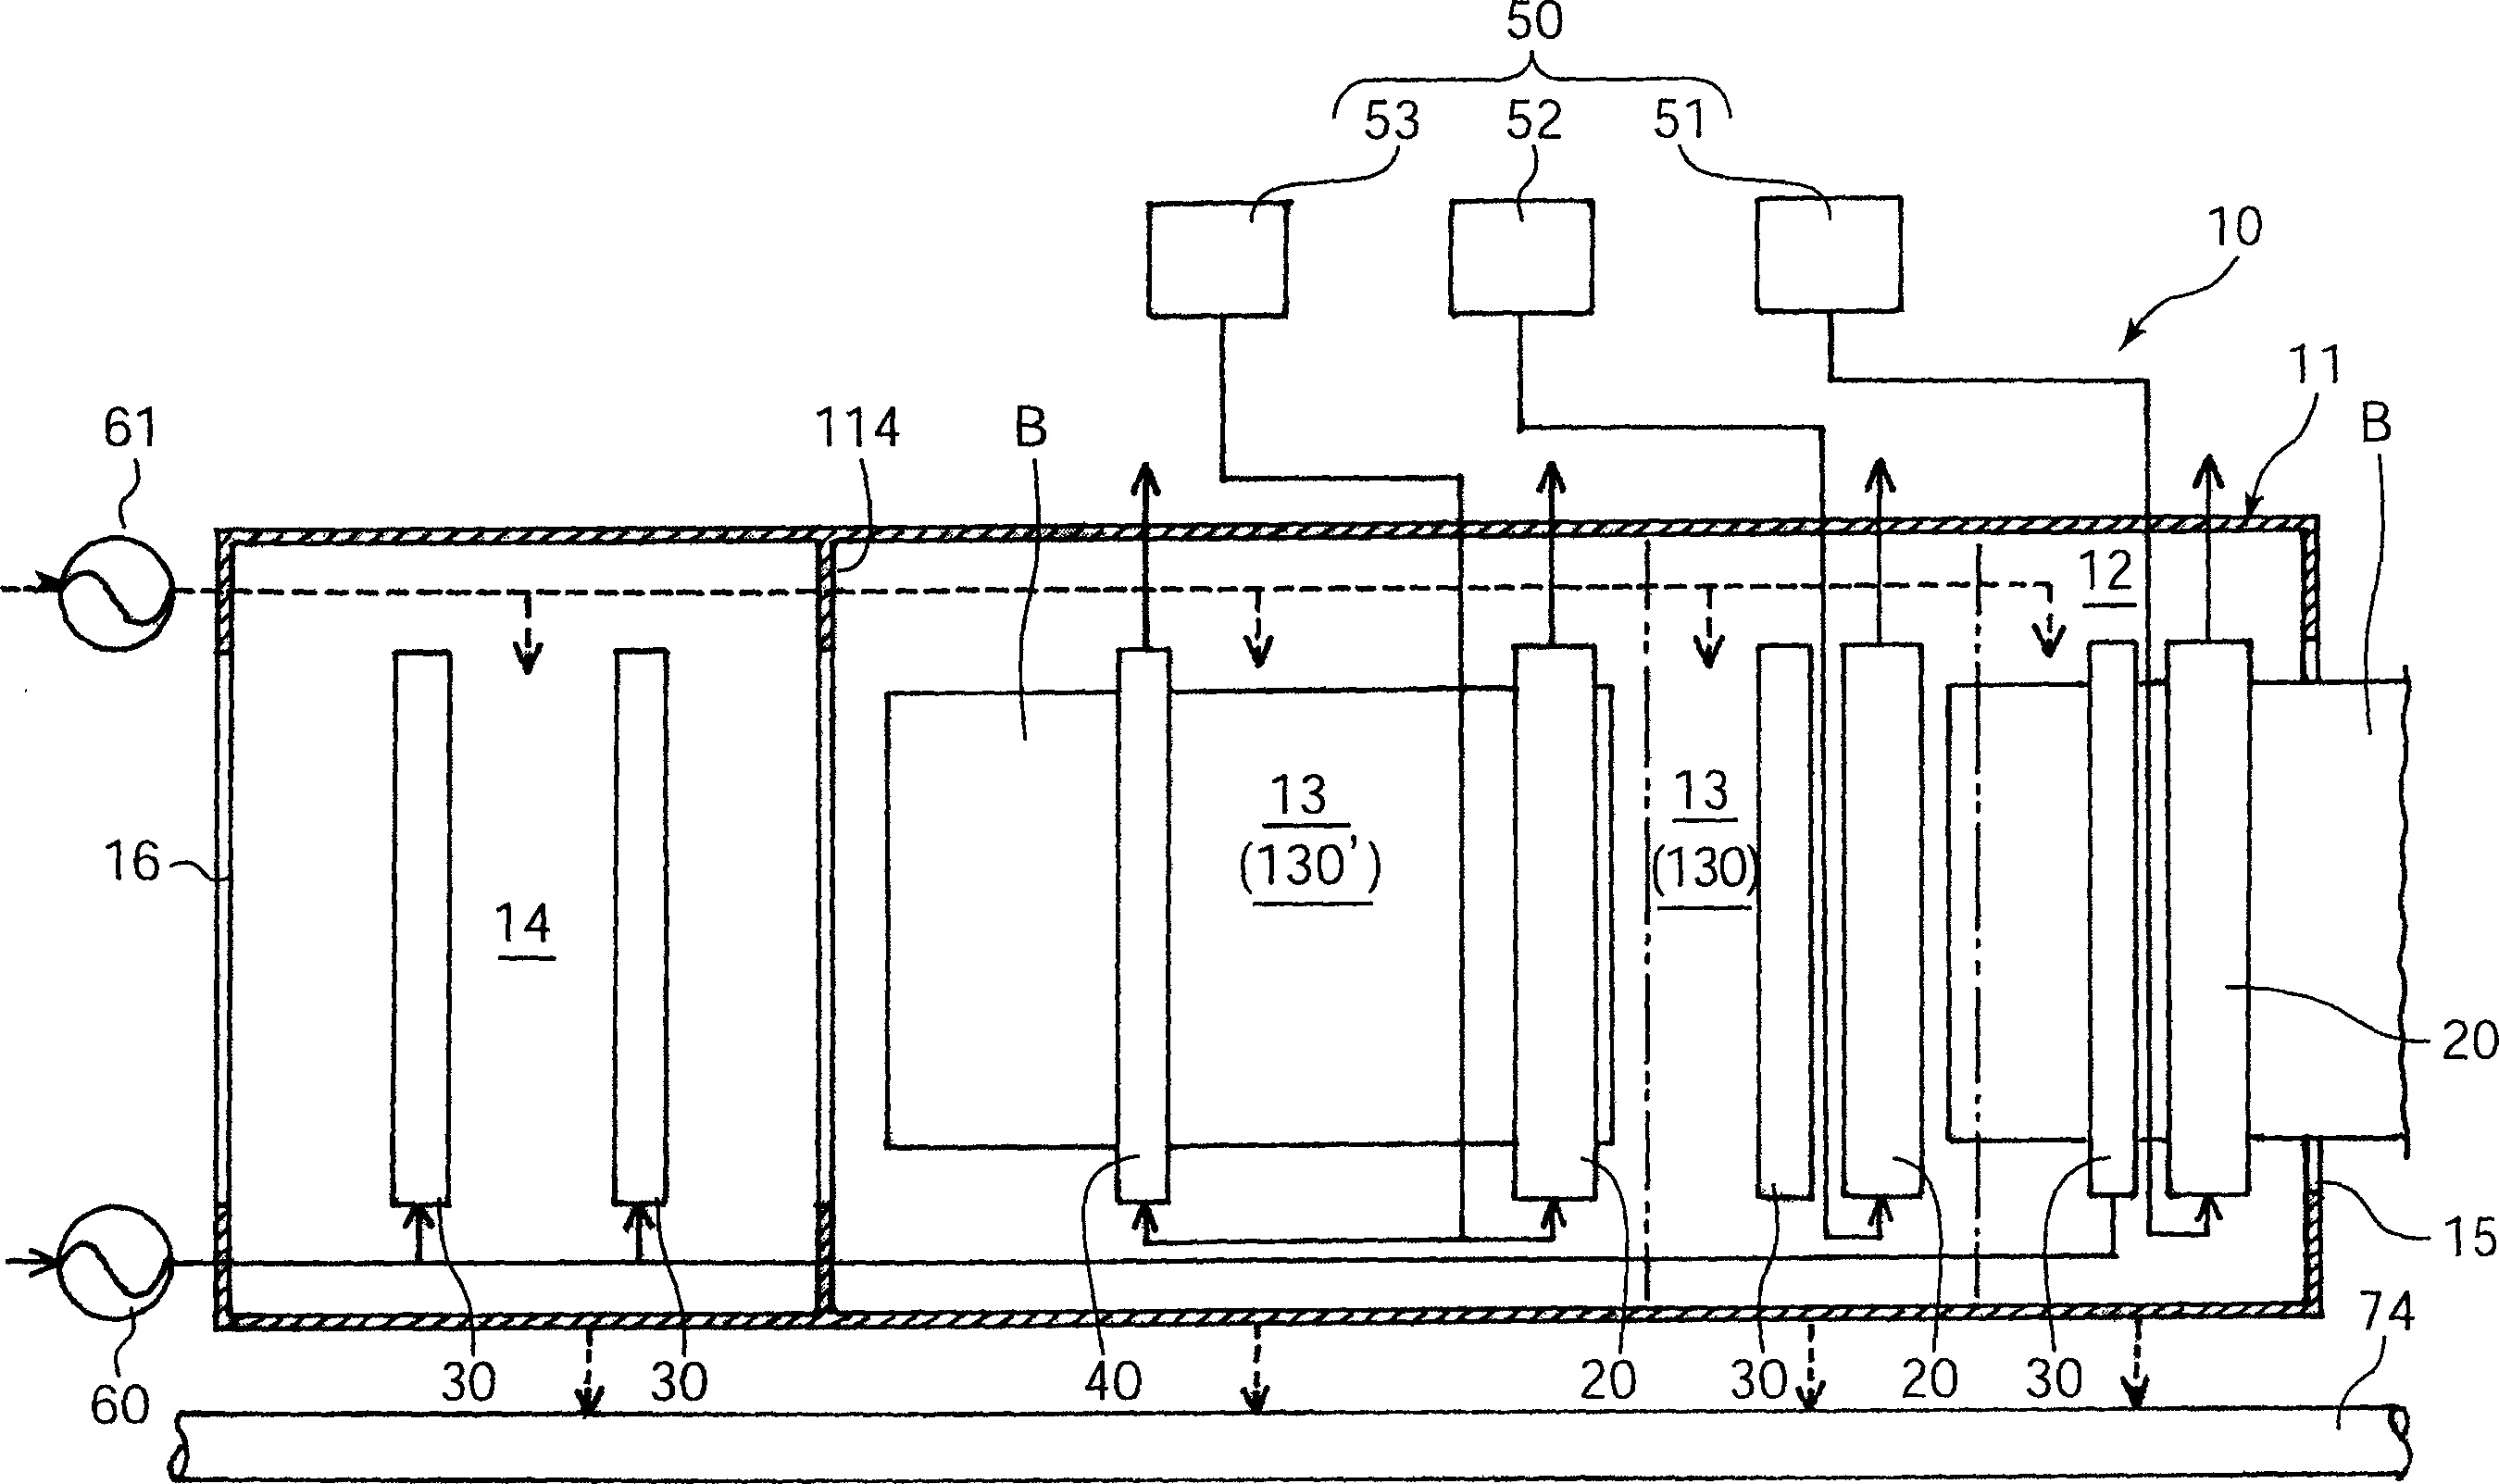 Substrate processor